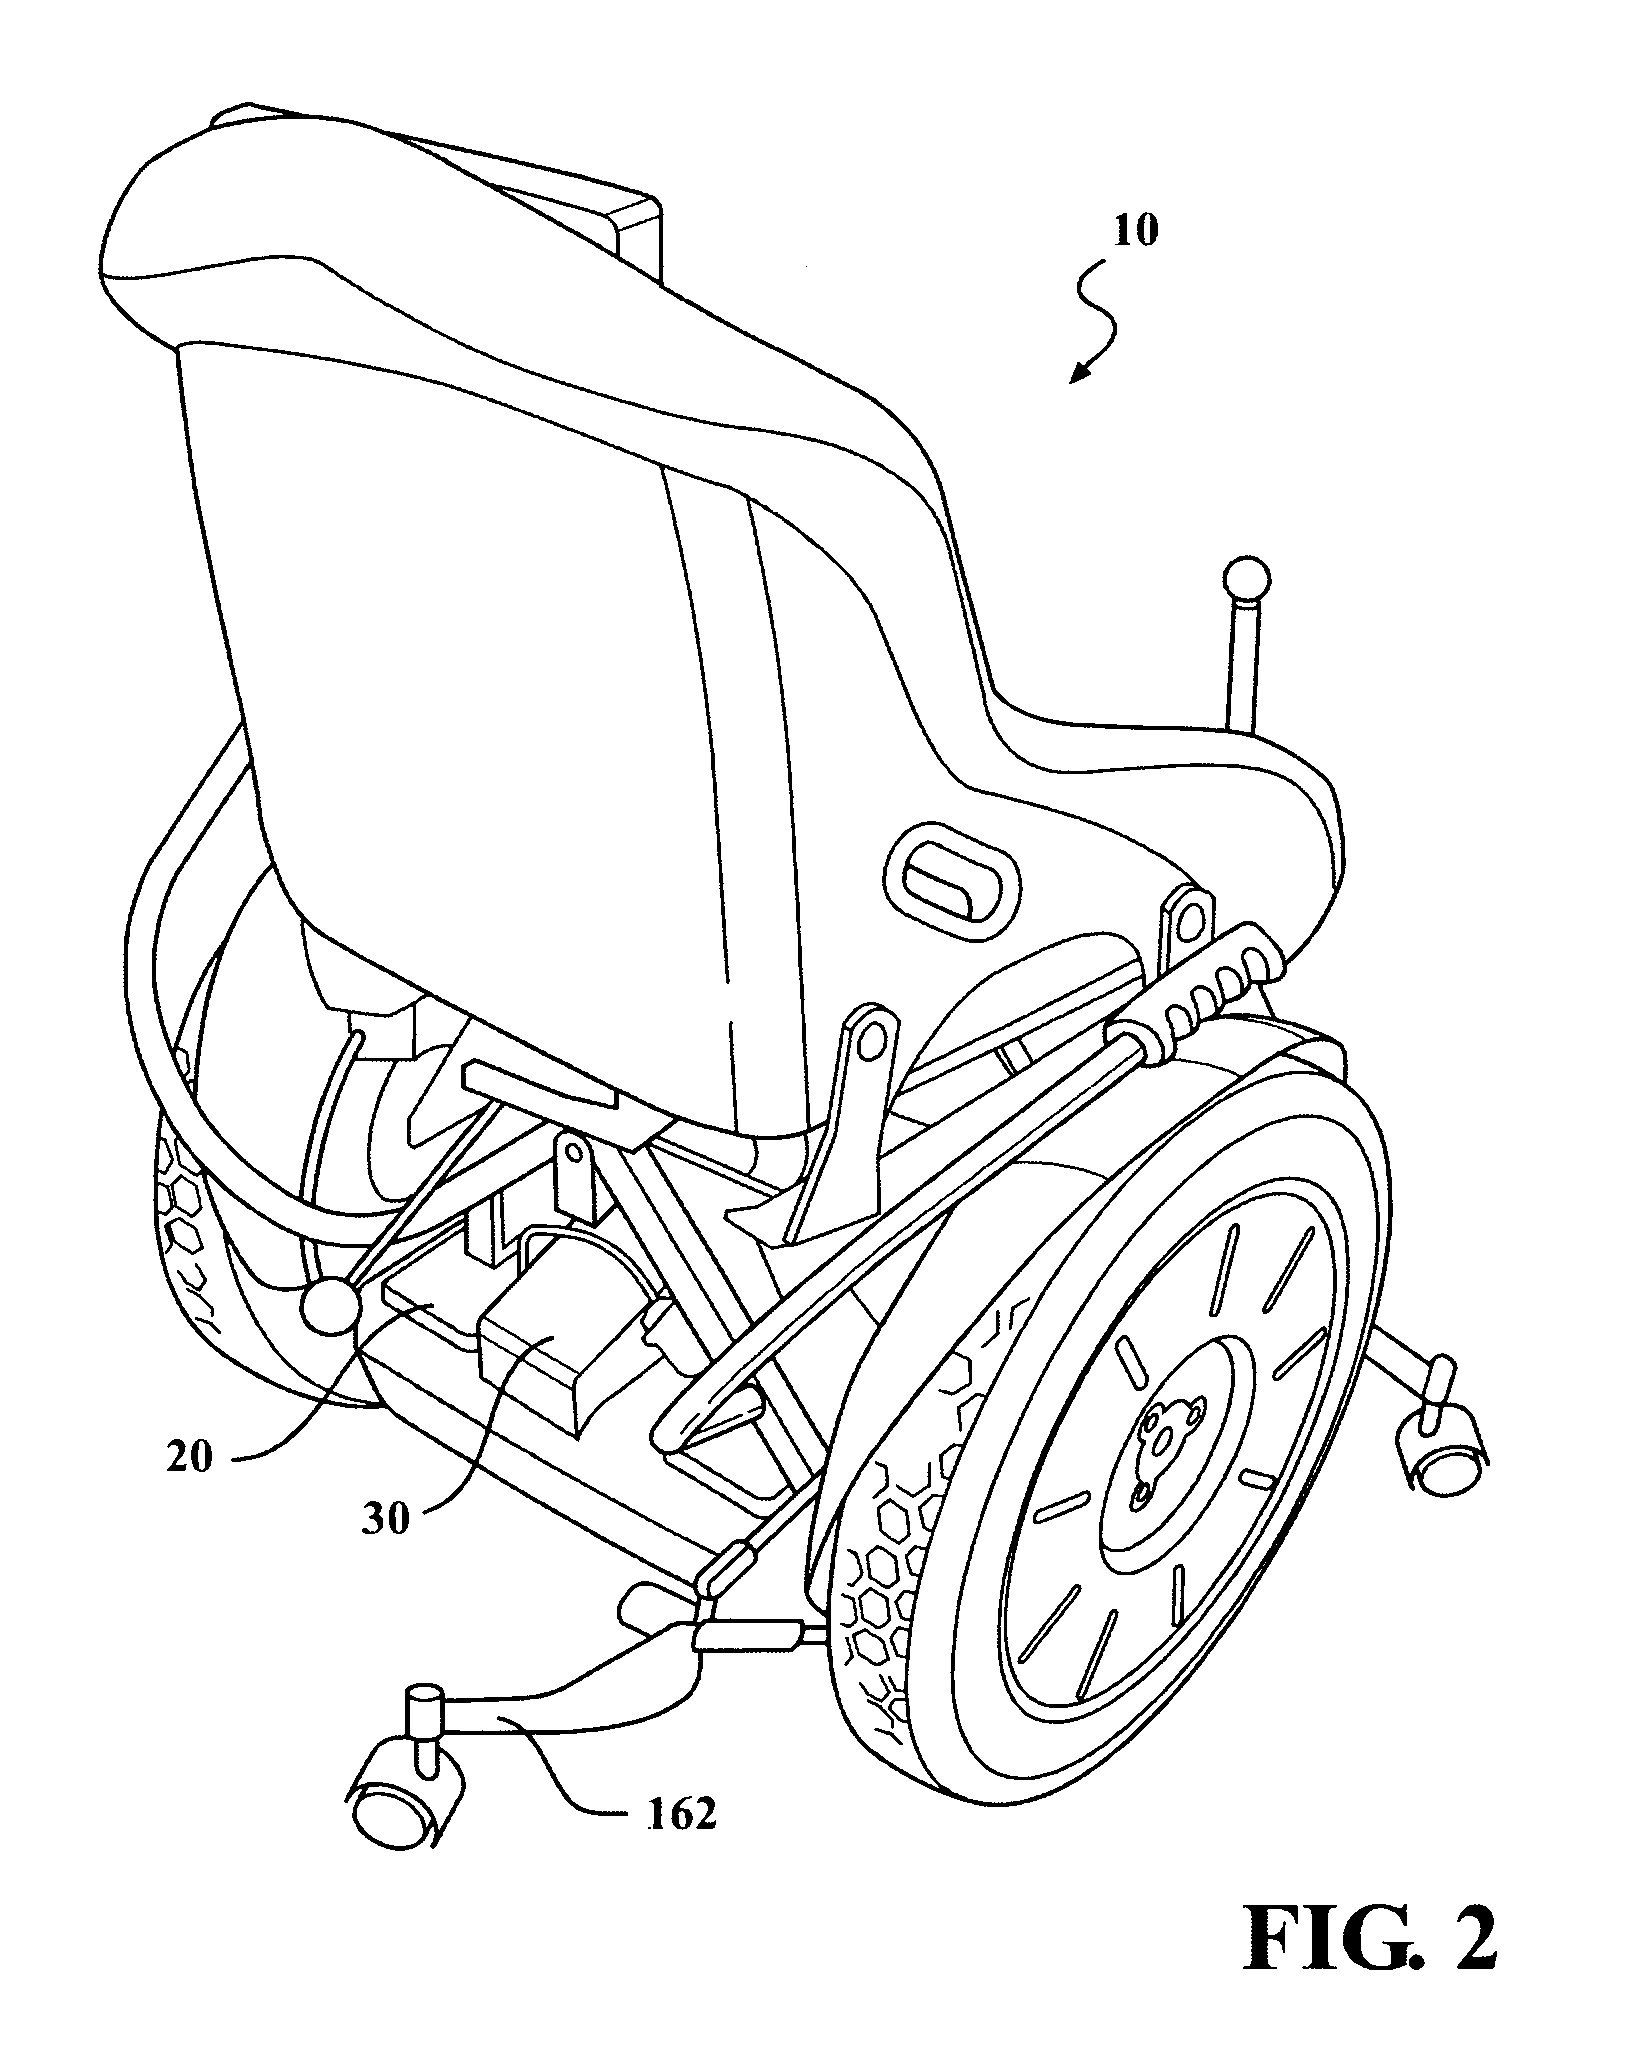 Powered mobility device